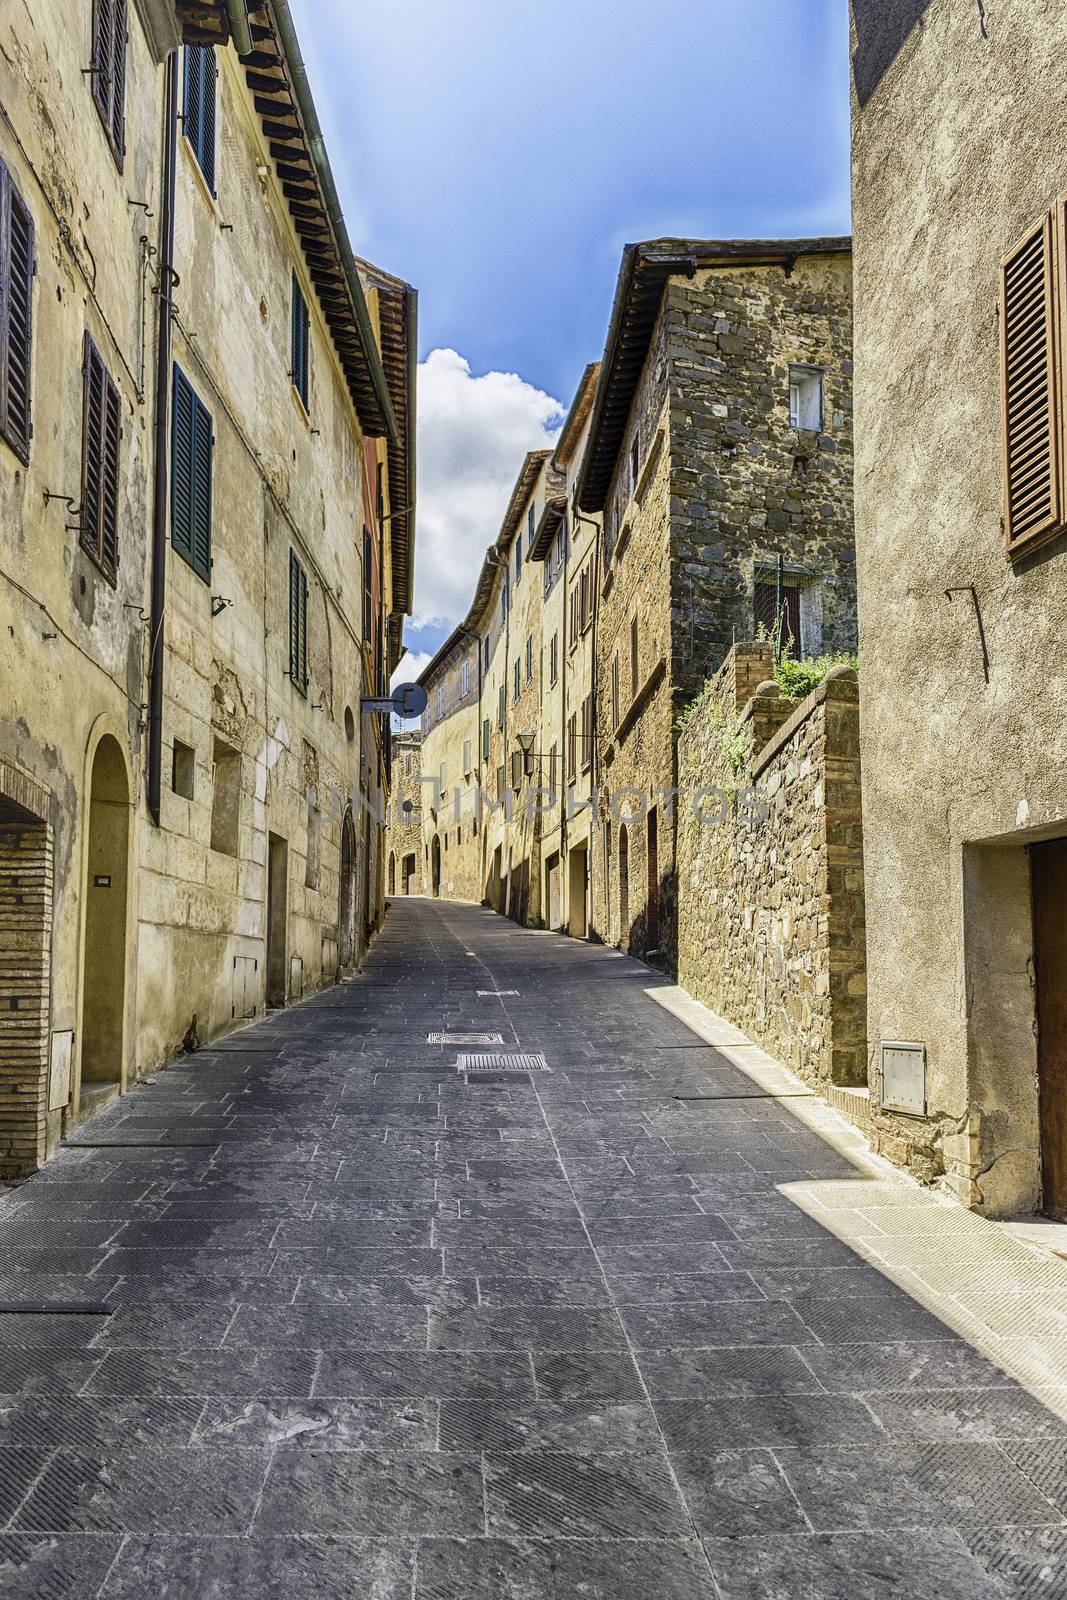 Medieval scenic streets in the town of Montalcino, province of Siena, Tuscany, Italy